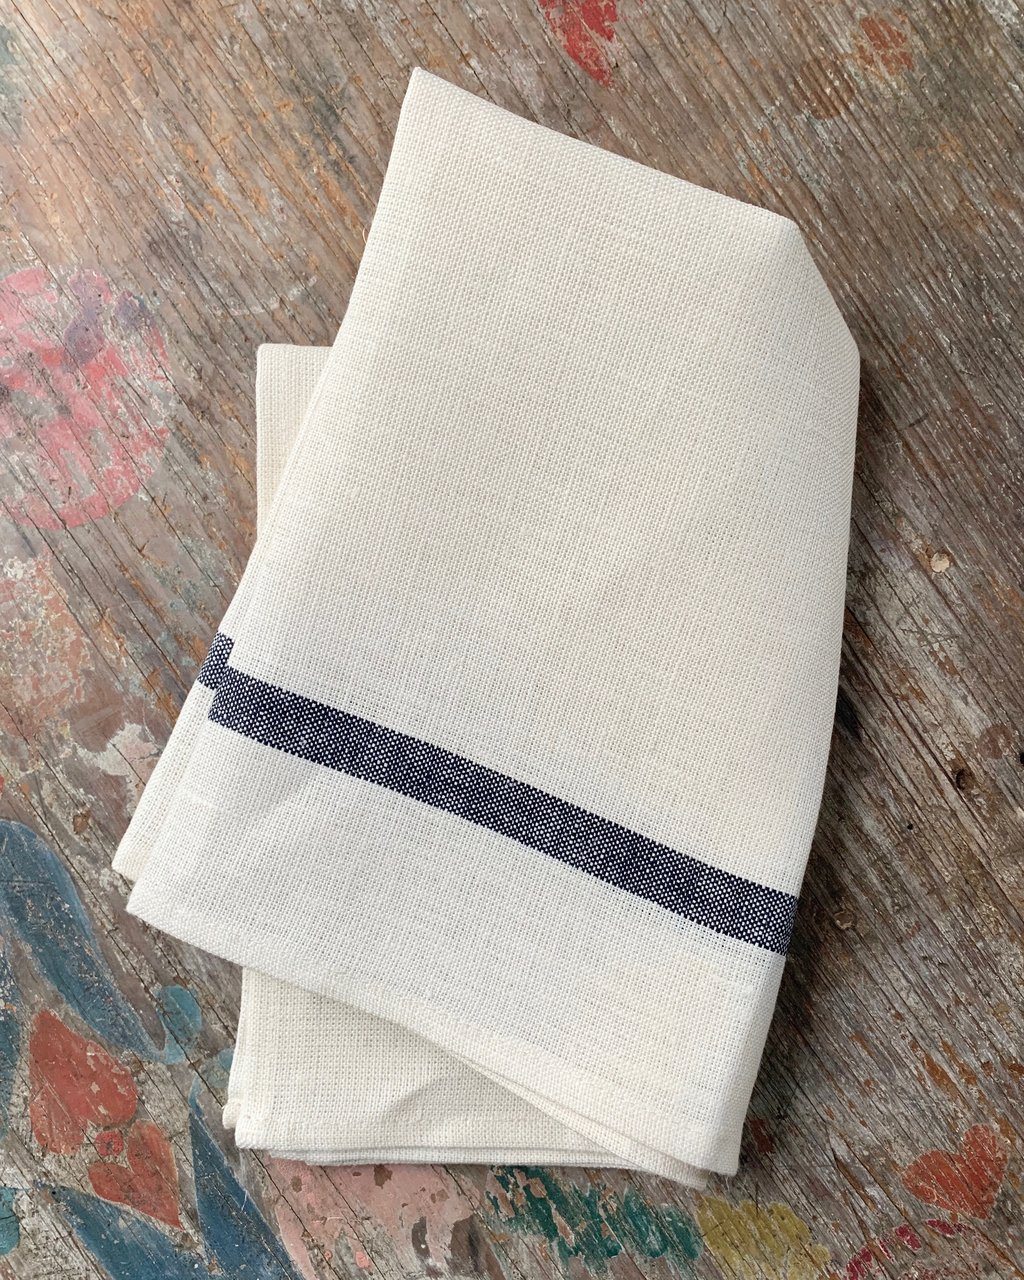 Morihata International Japanese Kitchen Towels in Striped Linen, 3 Colors  on Food52